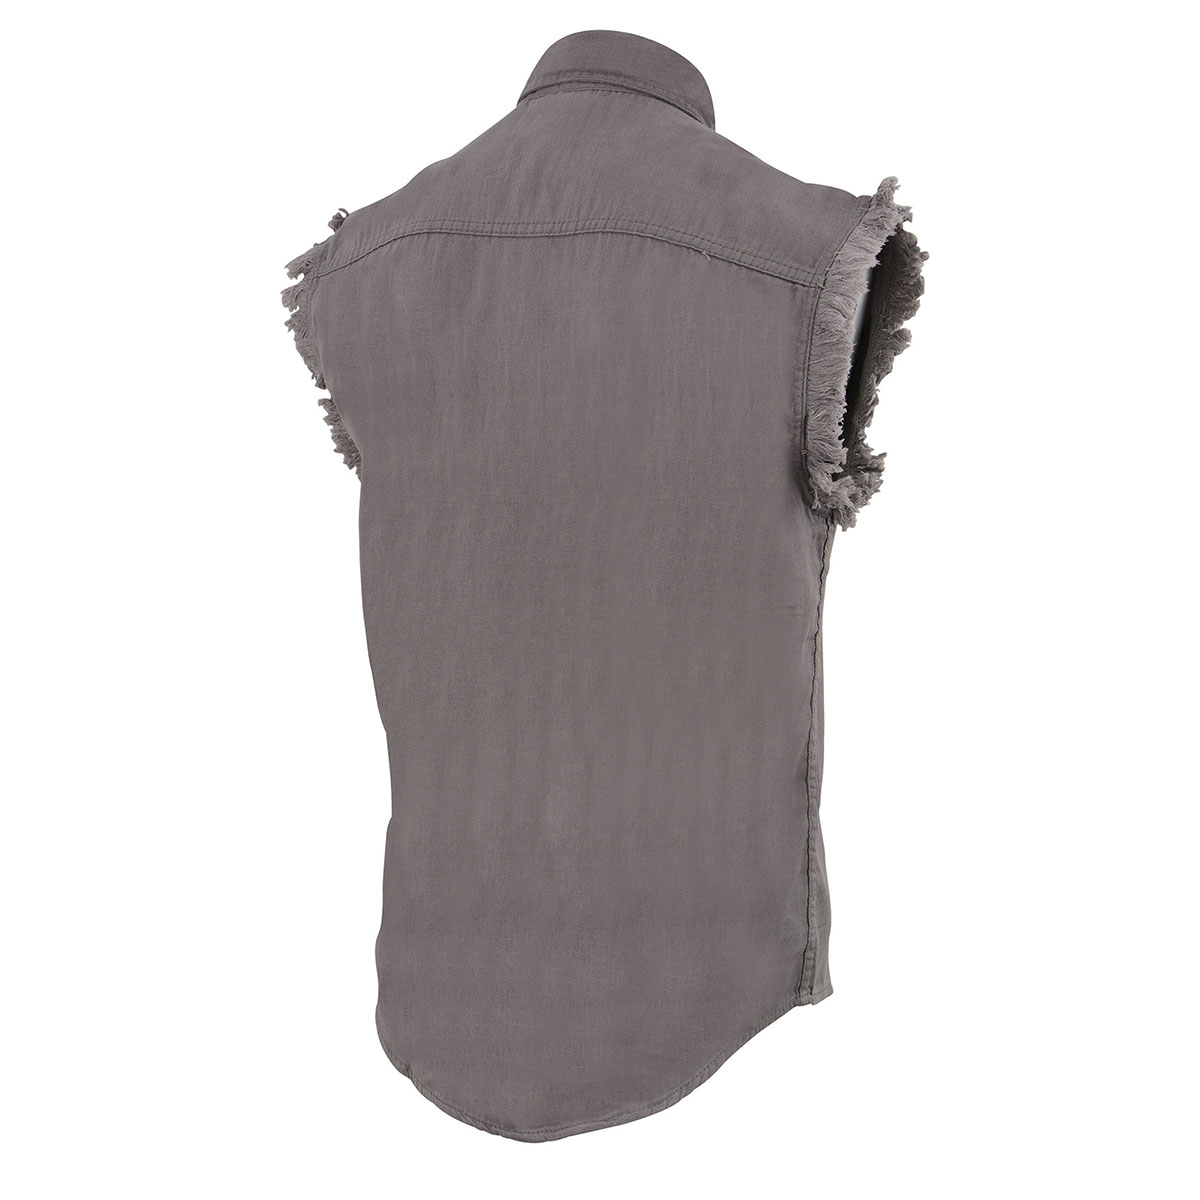 Milwaukee Leather DM4004 Men's Grey Lightweight Denim Shirt with with Frayed Cut Off Sleeveless Look 4X-Large - image 3 of 5